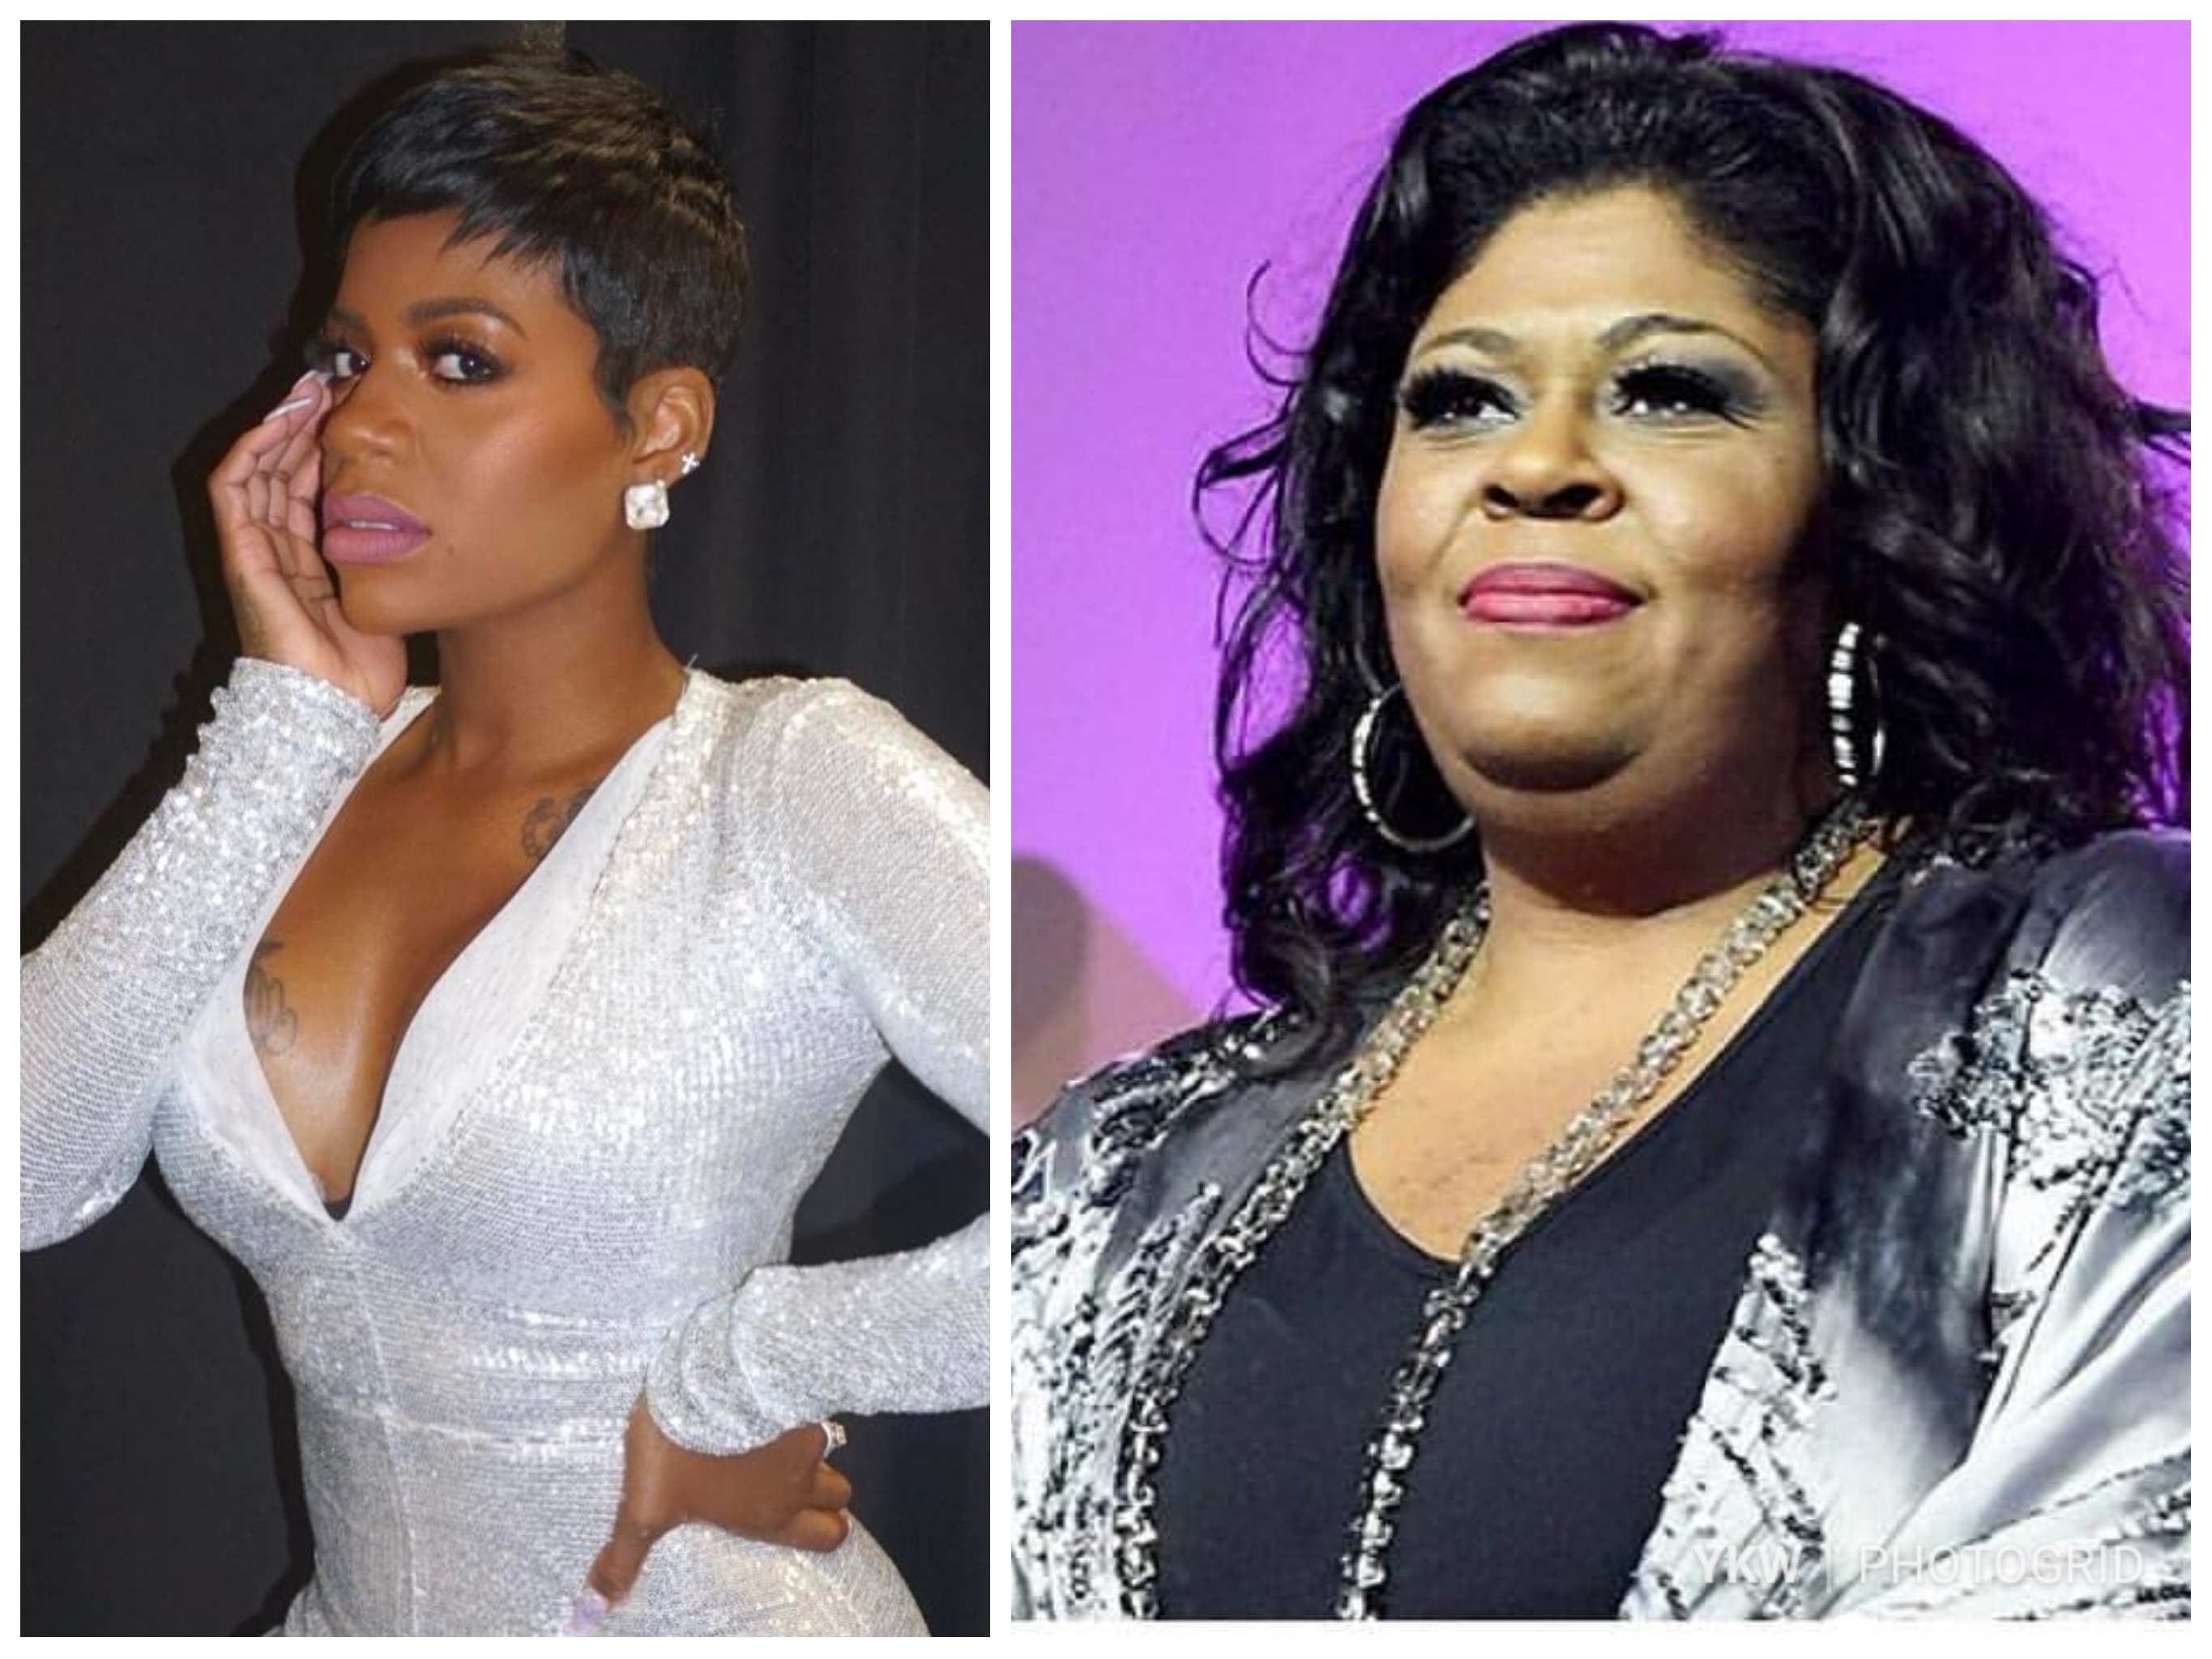 Kim Burrell Throws Shade At Fantasia In Front of A Church Congregation